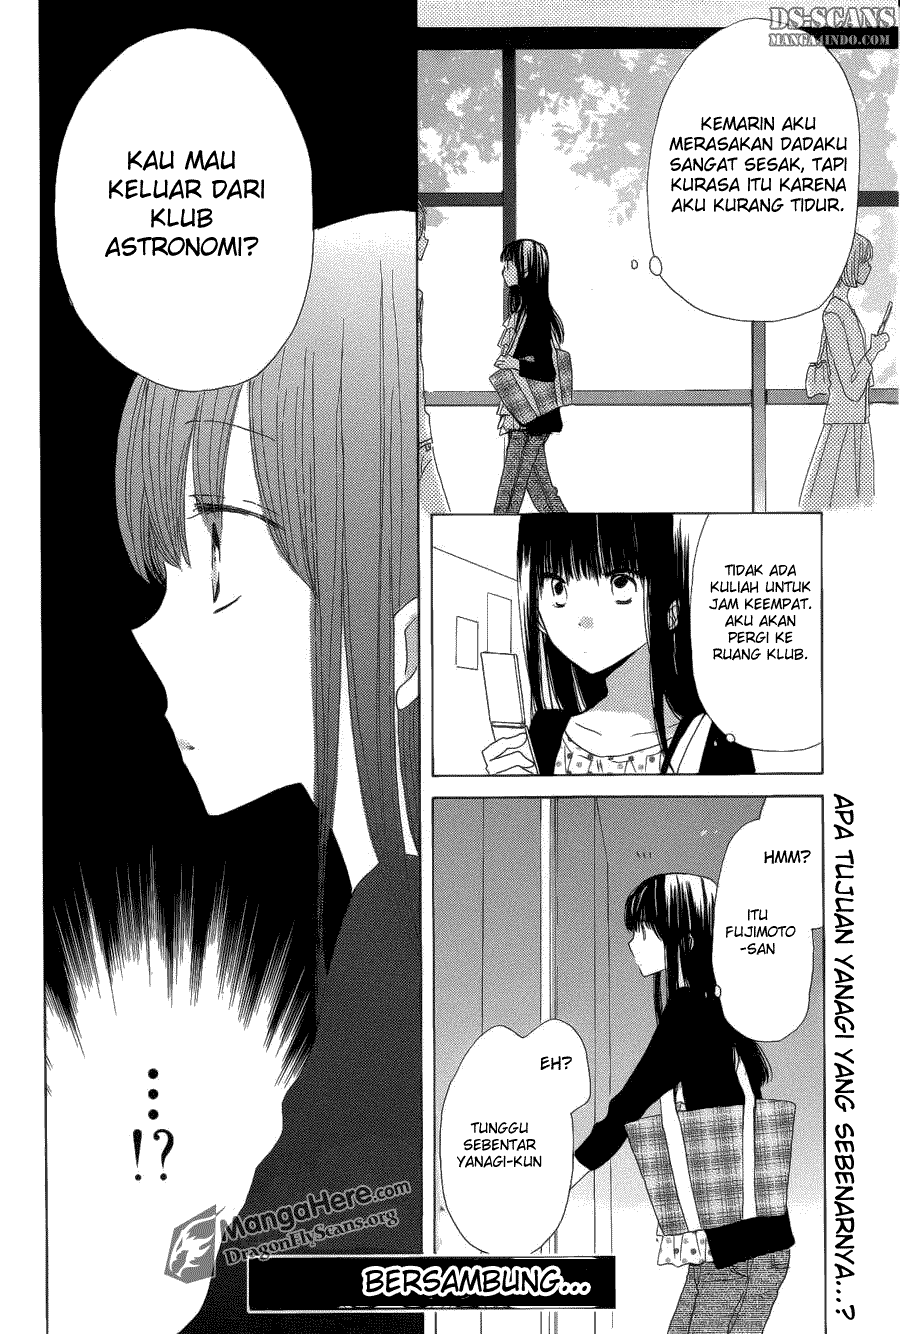 Last Game Chapter 07